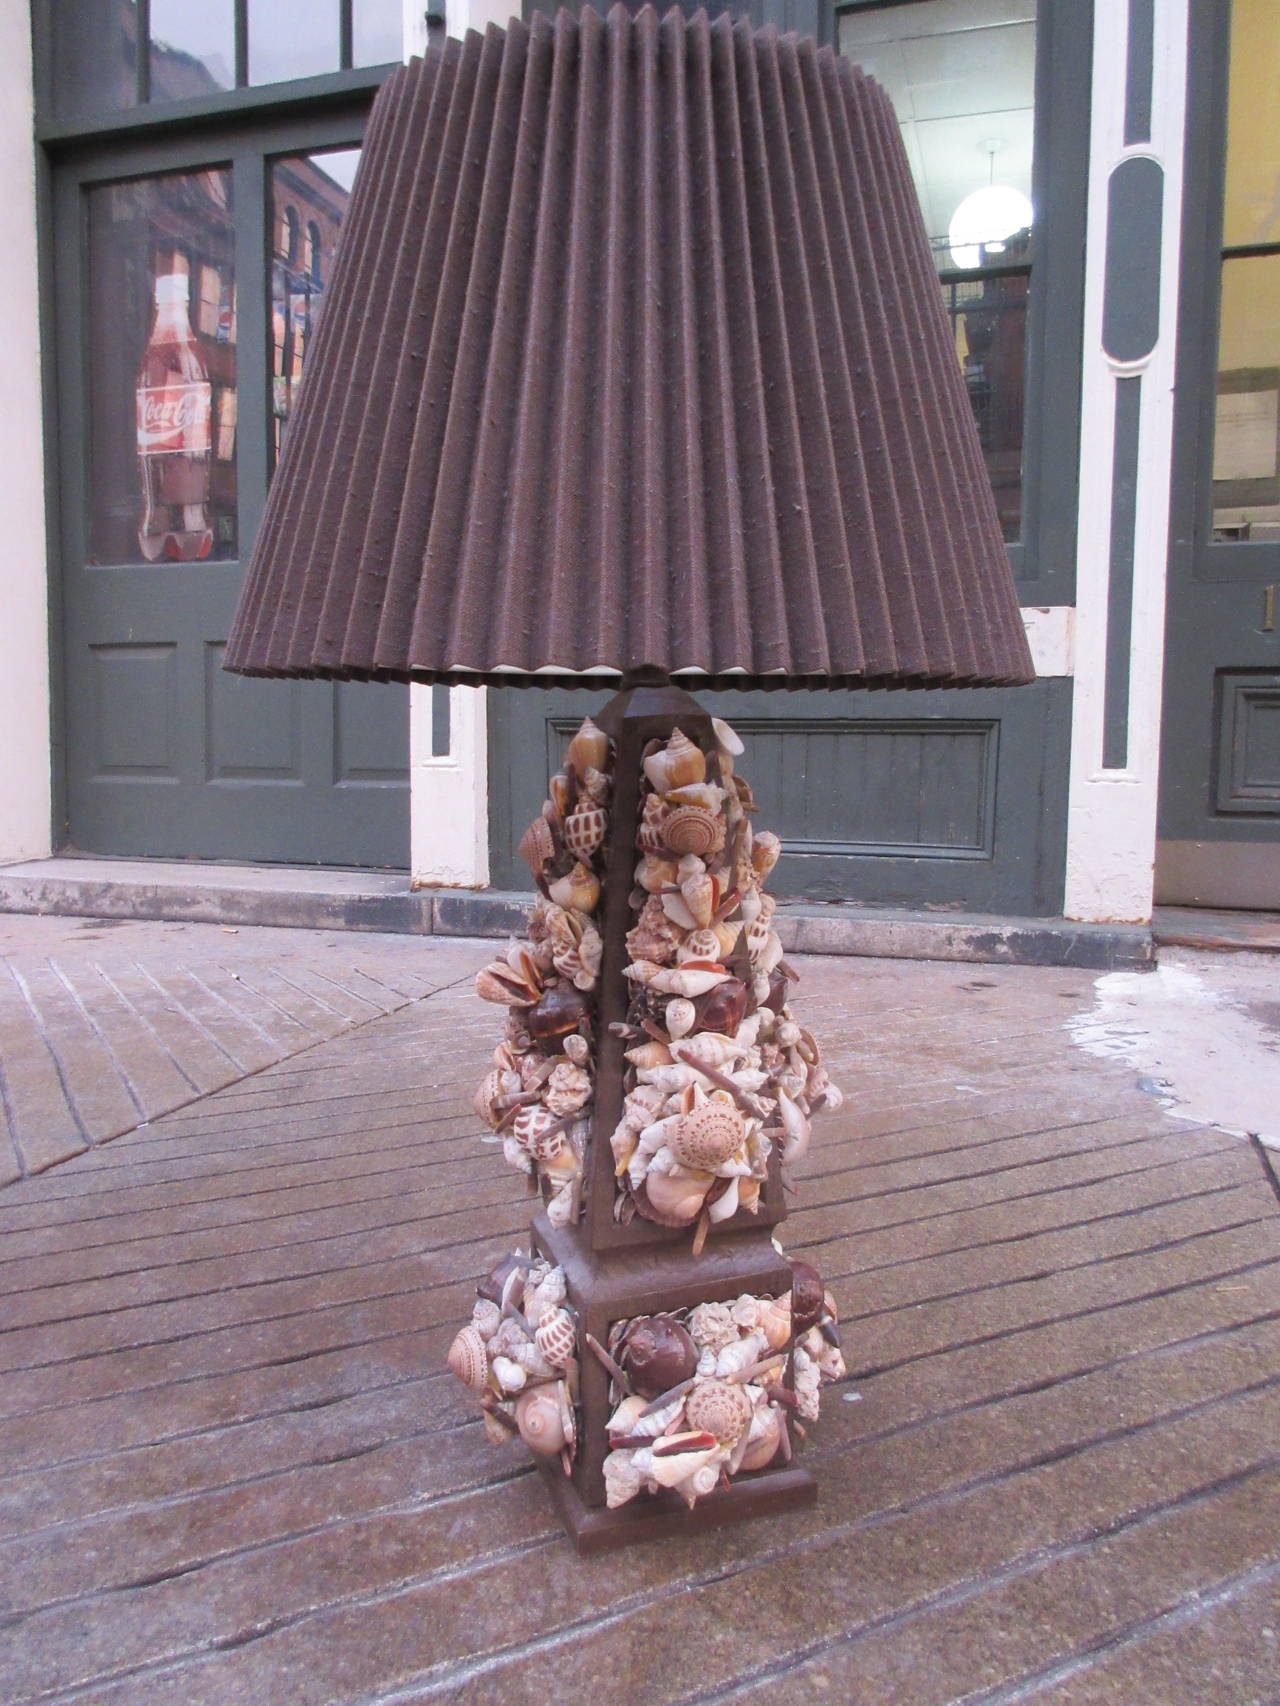 Large 1970s seashell lamp made up of 100's of different shells mounted on a wood column.